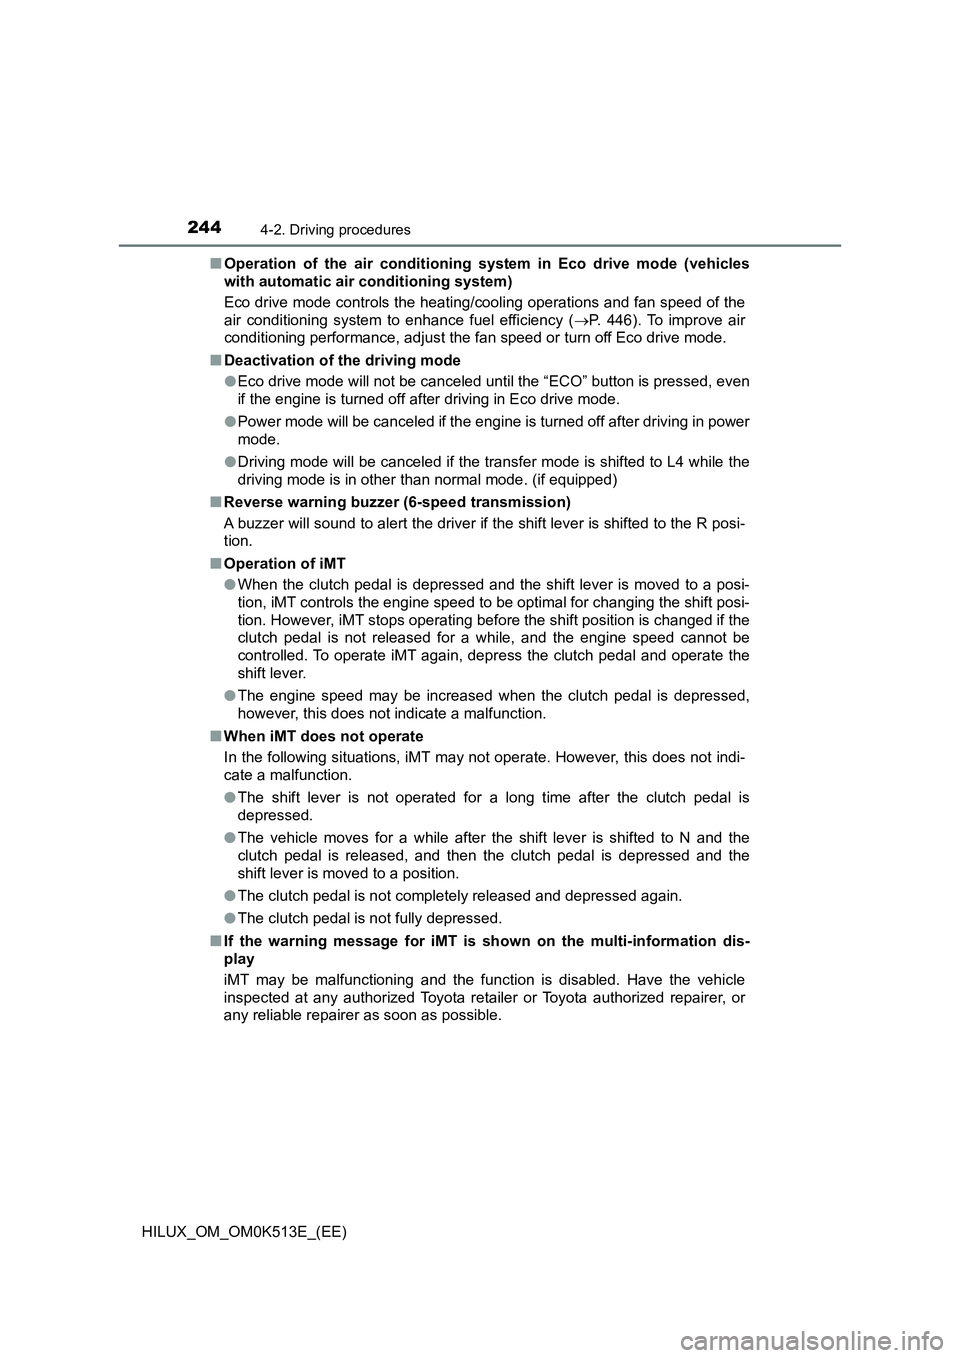 TOYOTA HILUX 2021  Owners Manual (in English) 2444-2. Driving procedures
HILUX_OM_OM0K513E_(EE) 
�Q Operation of the air conditioning system in Eco drive mode (vehicles 
with automatic air conditioning system) 
Eco drive mode controls the heating